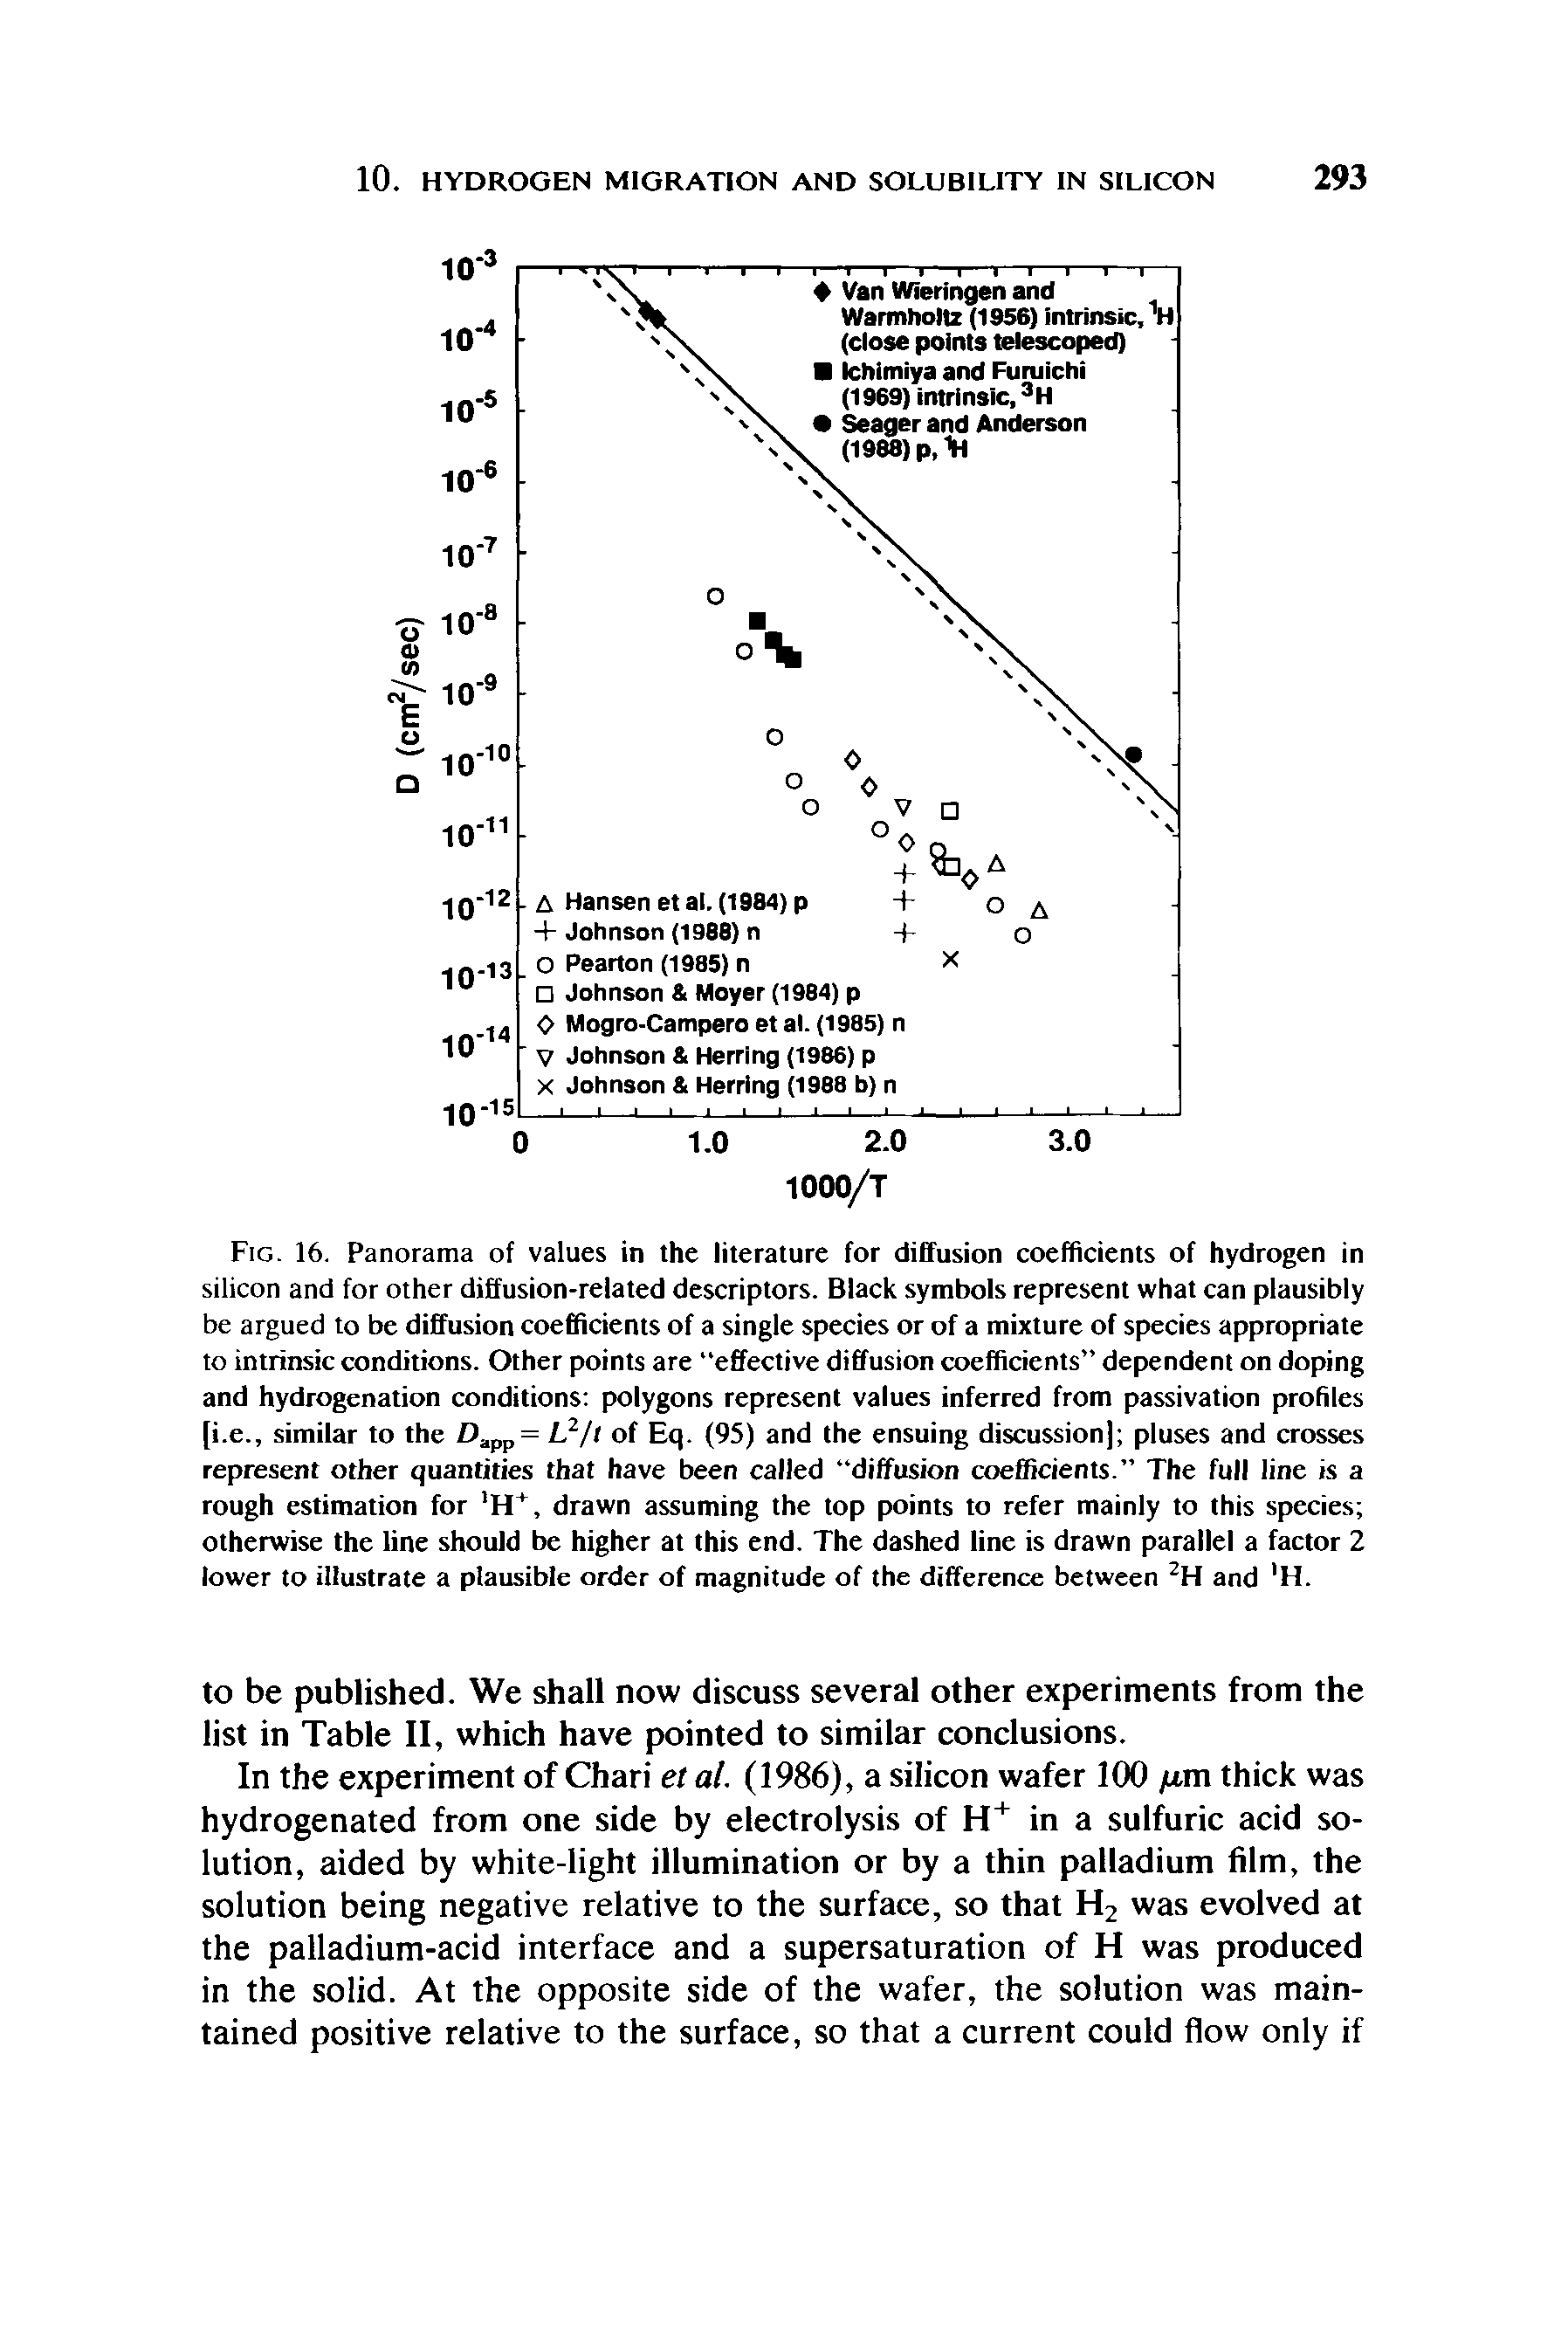 Fig. 16. Panorama of values in the literature for diffusion coefficients of hydrogen in silicon and for other diffusion-related descriptors. Black symbols represent what can plausibly be argued to be diffusion coefficients of a single species or of a mixture of species appropriate to intrinsic conditions. Other points are effective diffusion coefficients dependent on doping and hydrogenation conditions polygons represent values inferred from passivation profiles [i.e., similar to the Dapp = L2/t of Eq. (95) and the ensuing discussion] pluses and crosses represent other quantities that have been called diffusion coefficients. The full line is a rough estimation for H+, drawn assuming the top points to refer mainly to this species otherwise the line should be higher at this end. The dashed line is drawn parallel a factor 2 lower to illustrate a plausible order of magnitude of the difference between 2H and H.